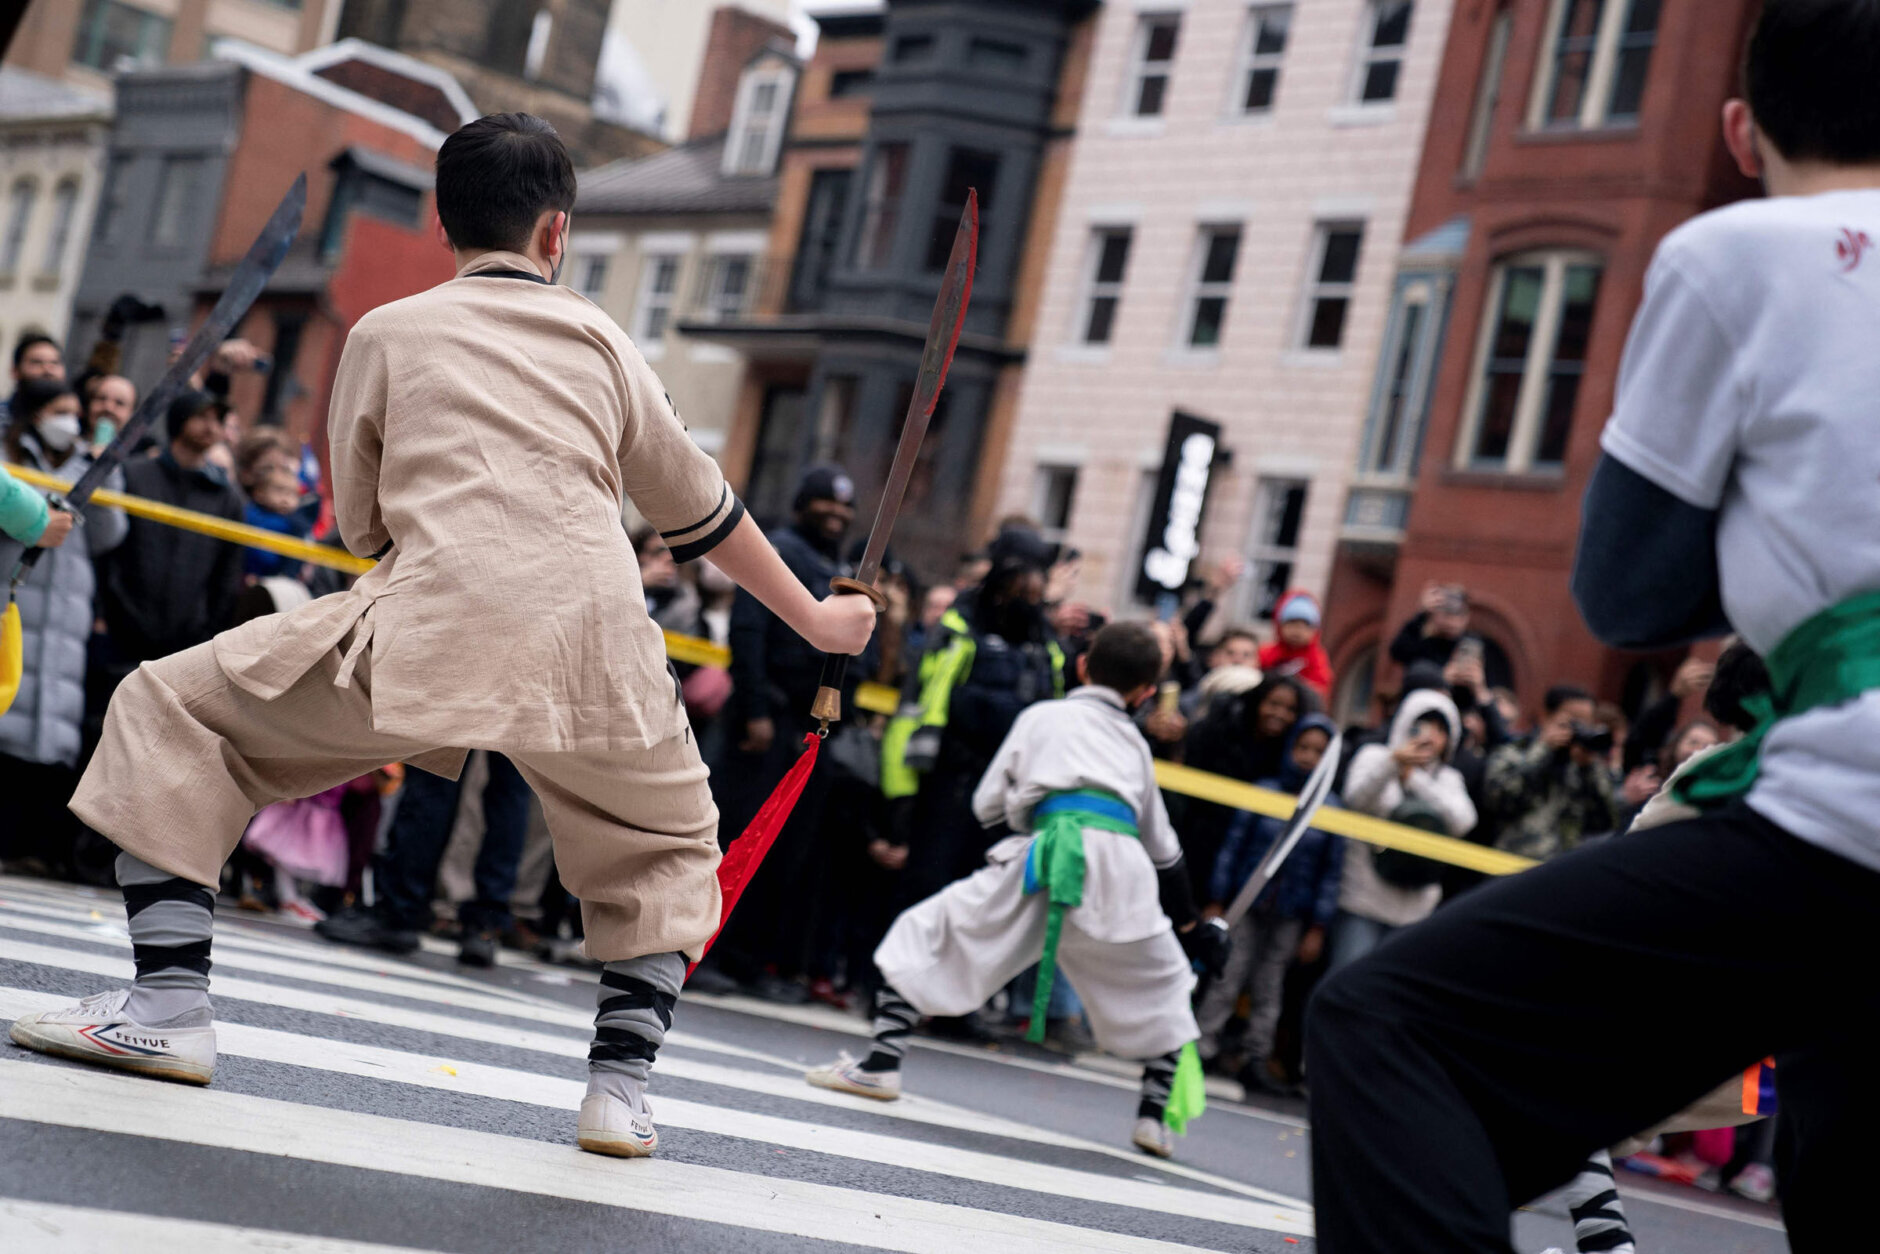 Participants perform during the Lunar New Year Parade in the Chinatown neighborhood of Washington, DC, on January 22, 2023. - 2023 is the year of the rabbit in the Chinese horoscope. (Photo by Stefani Reynolds / AFP) (Photo by STEFANI REYNOLDS/AFP via Getty Images)